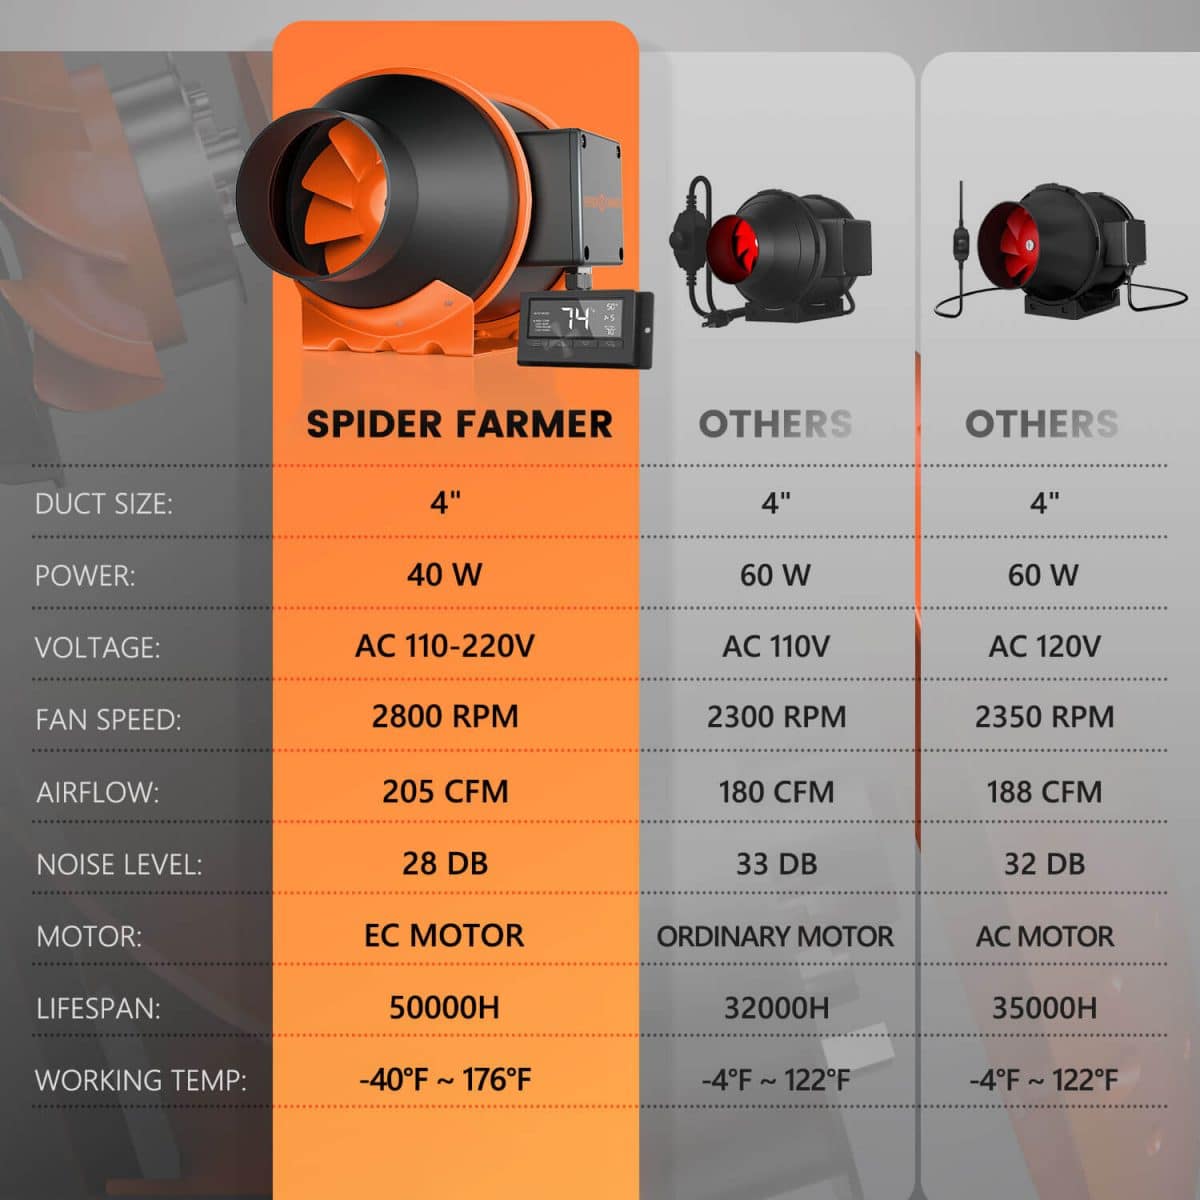 Spider Farmer 4 inch inline fan compare with other brand